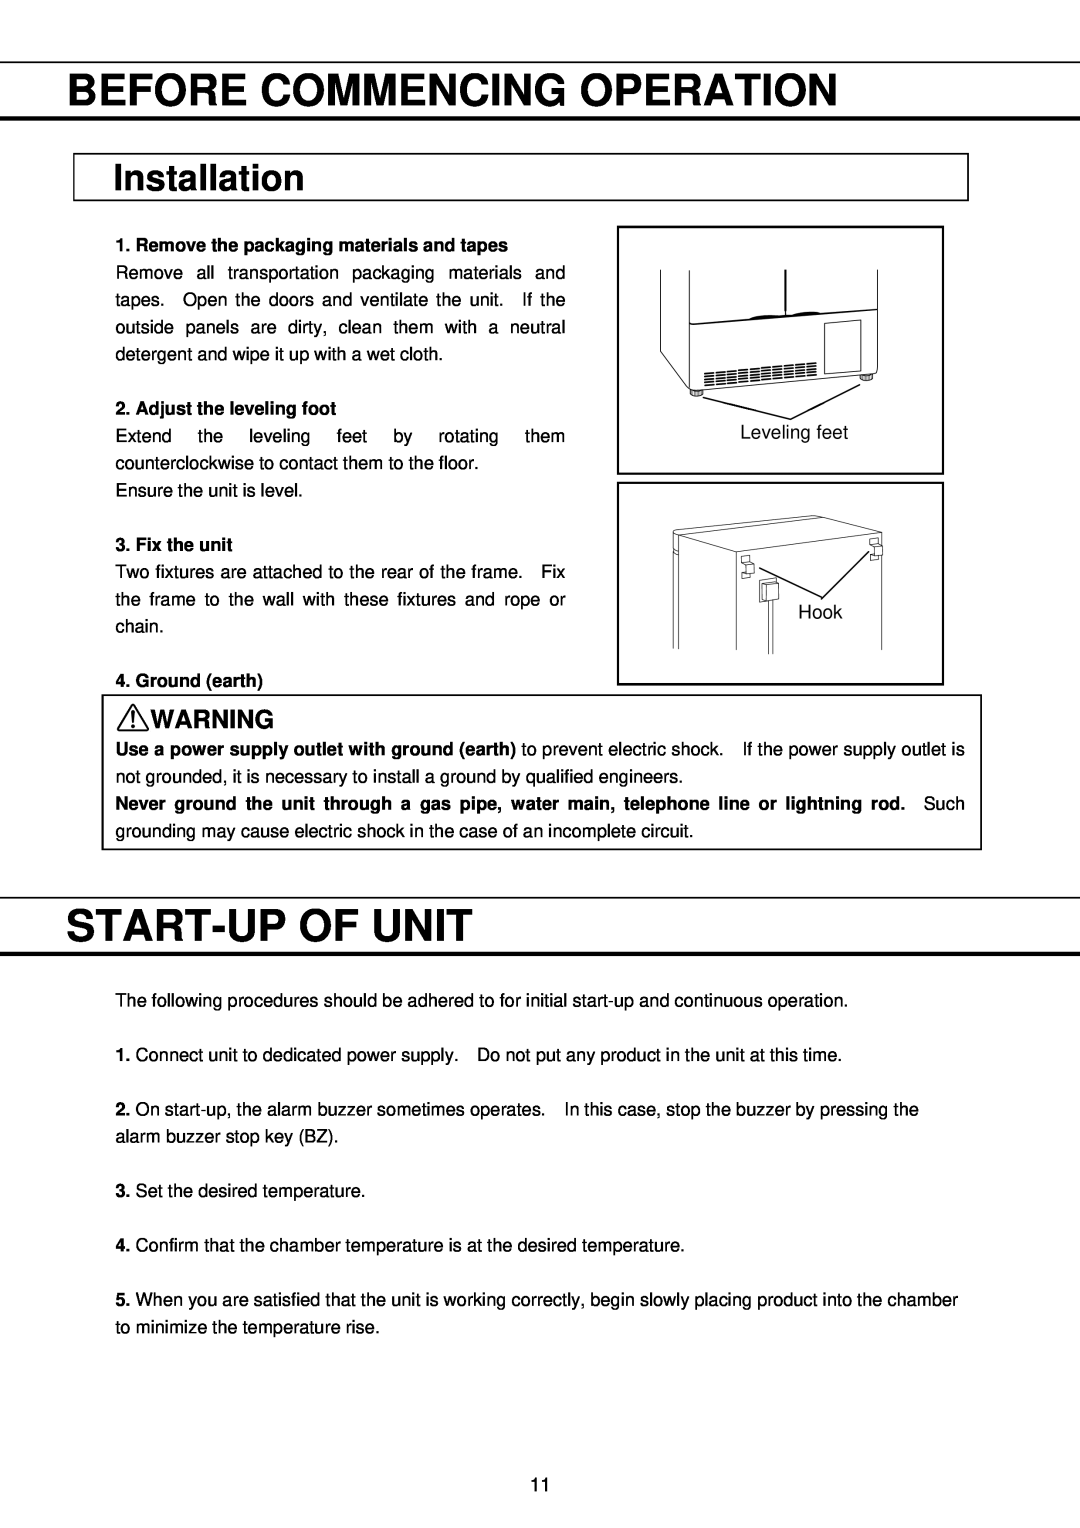 Sanyo MPR-411FR instruction manual Start-Upof Unit, Installation, Before Commencing Operation 